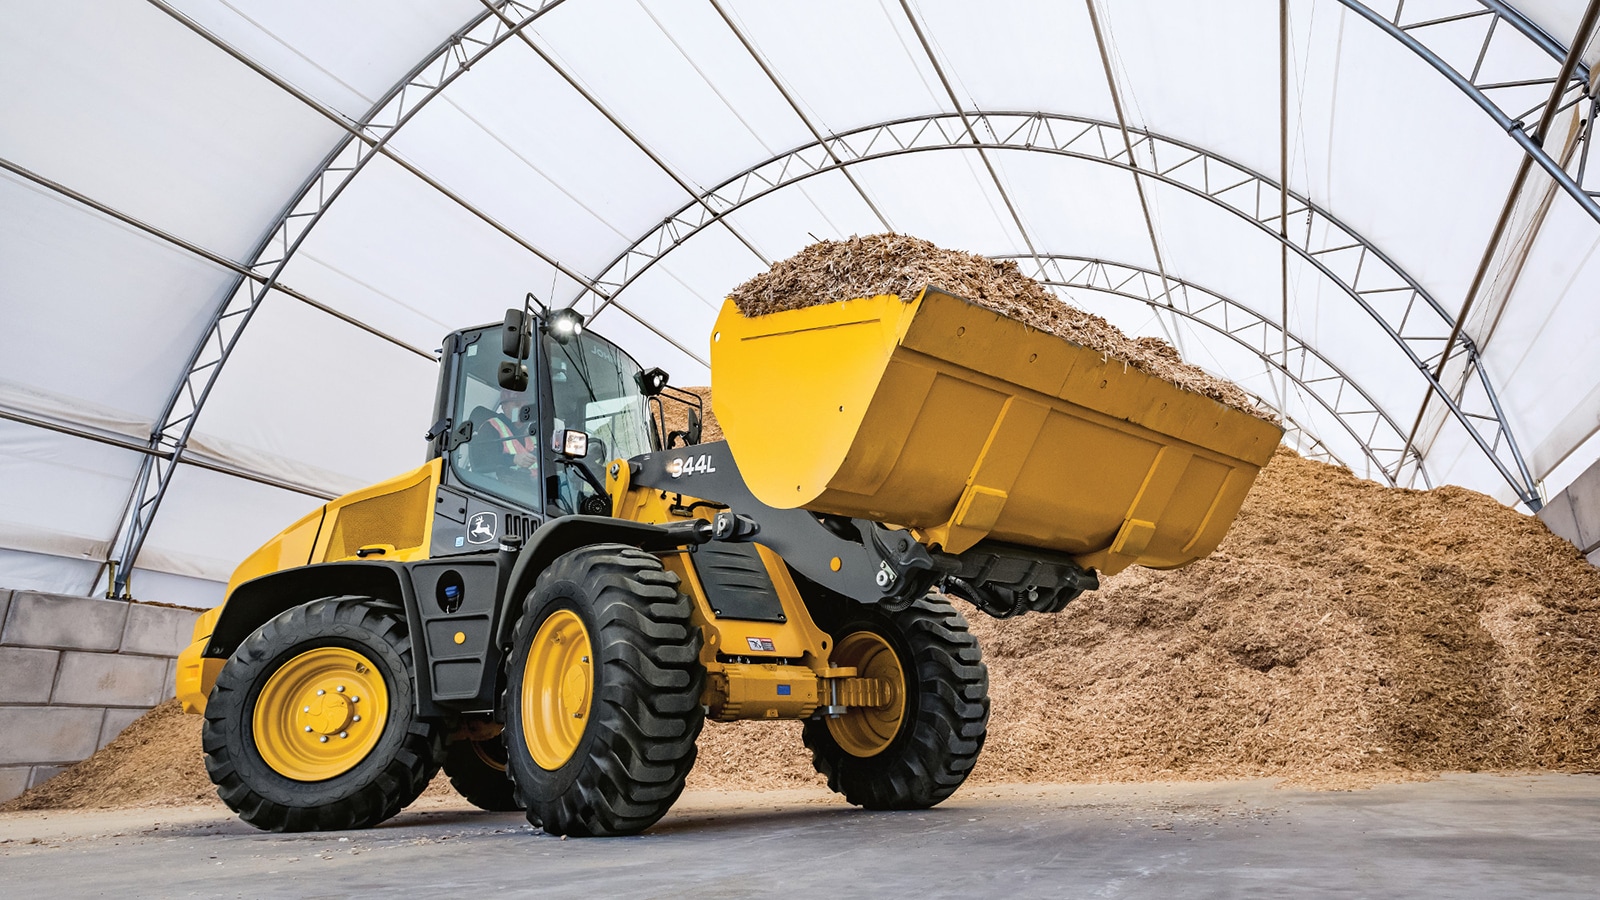 344L loader carries a bucket full of mulch inside a hoop building